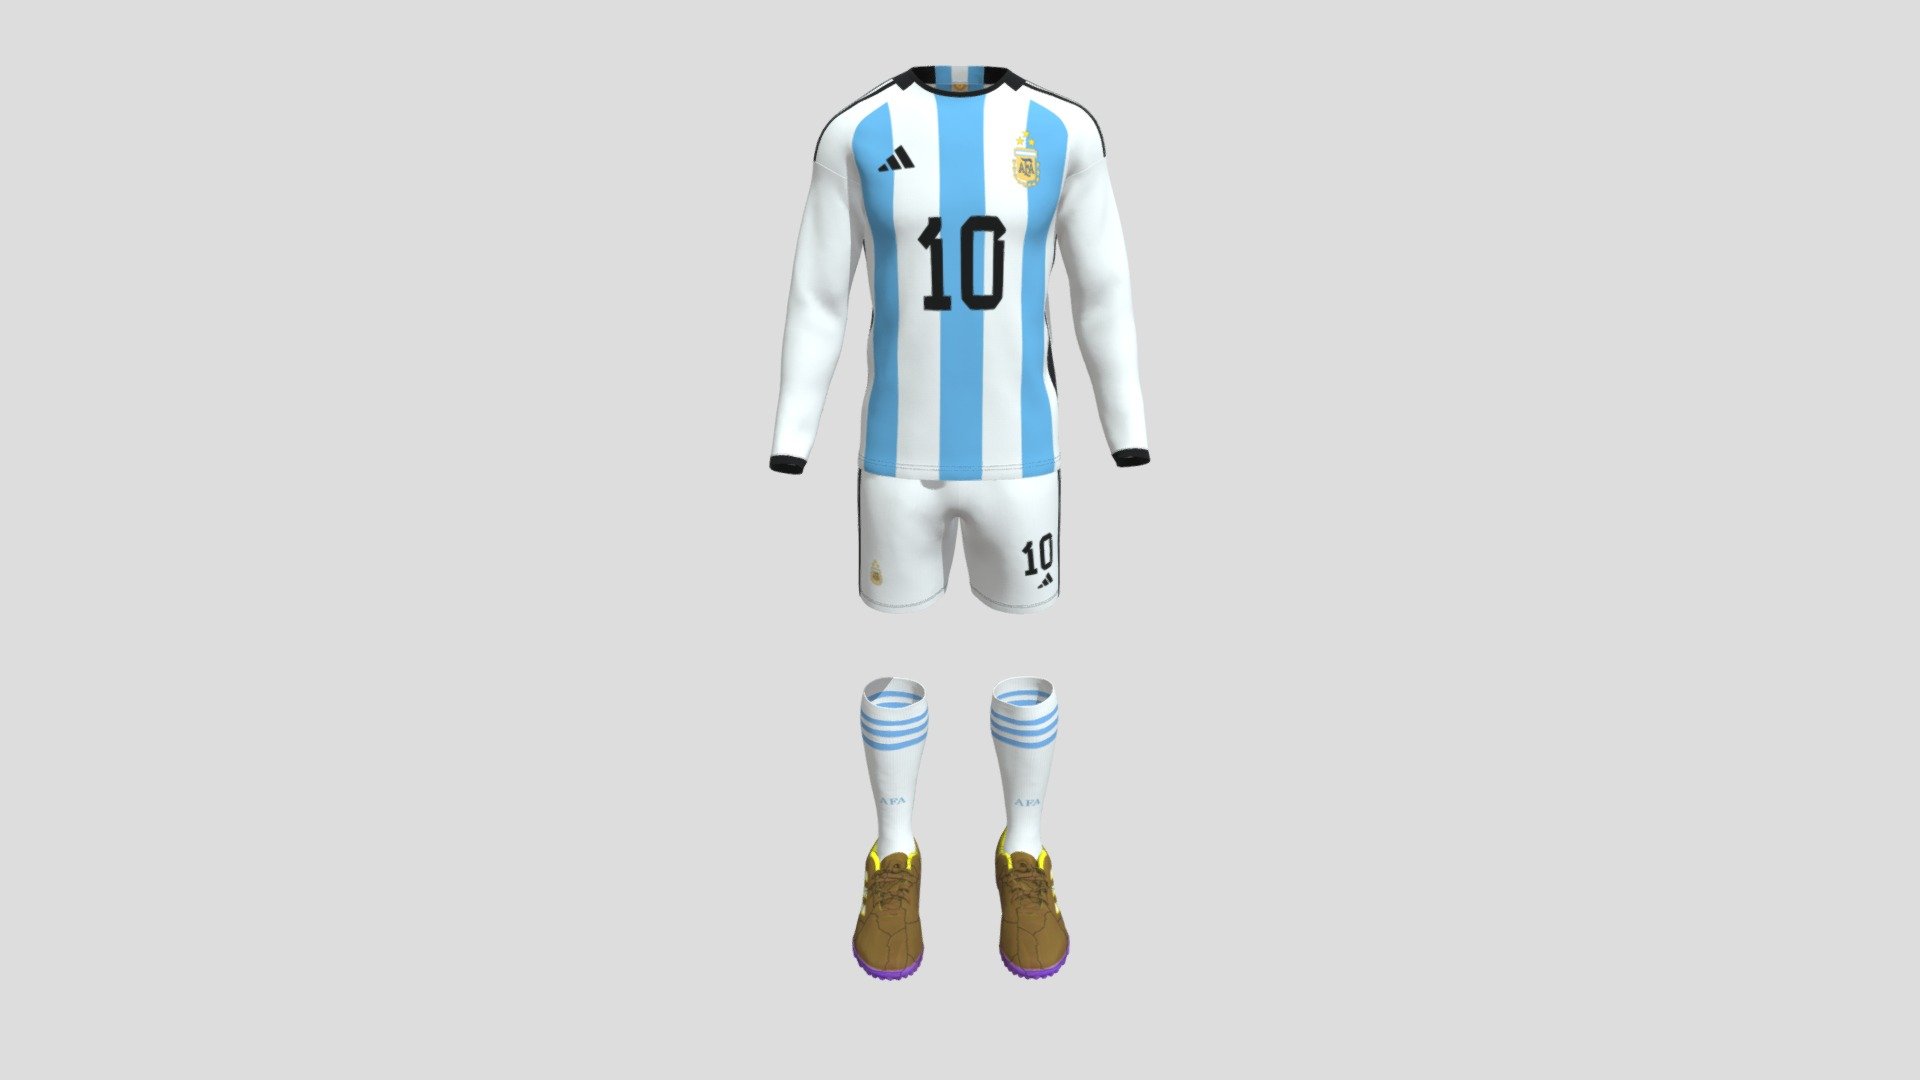 Cloth Title = Messi Argentina Jersey 

SKU = DG100269 

Category = Men 

Product Type = Jersey 

Cloth Length = Regular 

Body Fit = Fitted  

Occasion = Sportswear  

Sleeve Style = Raglan Sleeve 


Our Services:

3D Apparel Design.

OBJ,FBX,GLTF Making with High/Low Poly.

Fabric Digitalization.

Mockup making.

3D Teck Pack.

Pattern Making.

2D Illustration.

Cloth Animation and 360 Spin Video.


Contact us:- 

Email: info@digitalfashionwear.com 

Website: https://digitalfashionwear.com 


We designed all the types of cloth specially focused on product visualization, e-commerce, fitting, and production. 

We will design: 

T-shirts 

Polo shirts 

Hoodies 

Sweatshirt 

Jackets 

Shirts 

TankTops 

Trousers 

Bras 

Underwear 

Blazer 

Aprons 

Leggings 

and All Fashion items. 





Our goal is to make sure what we provide you, meets your demand 3d model